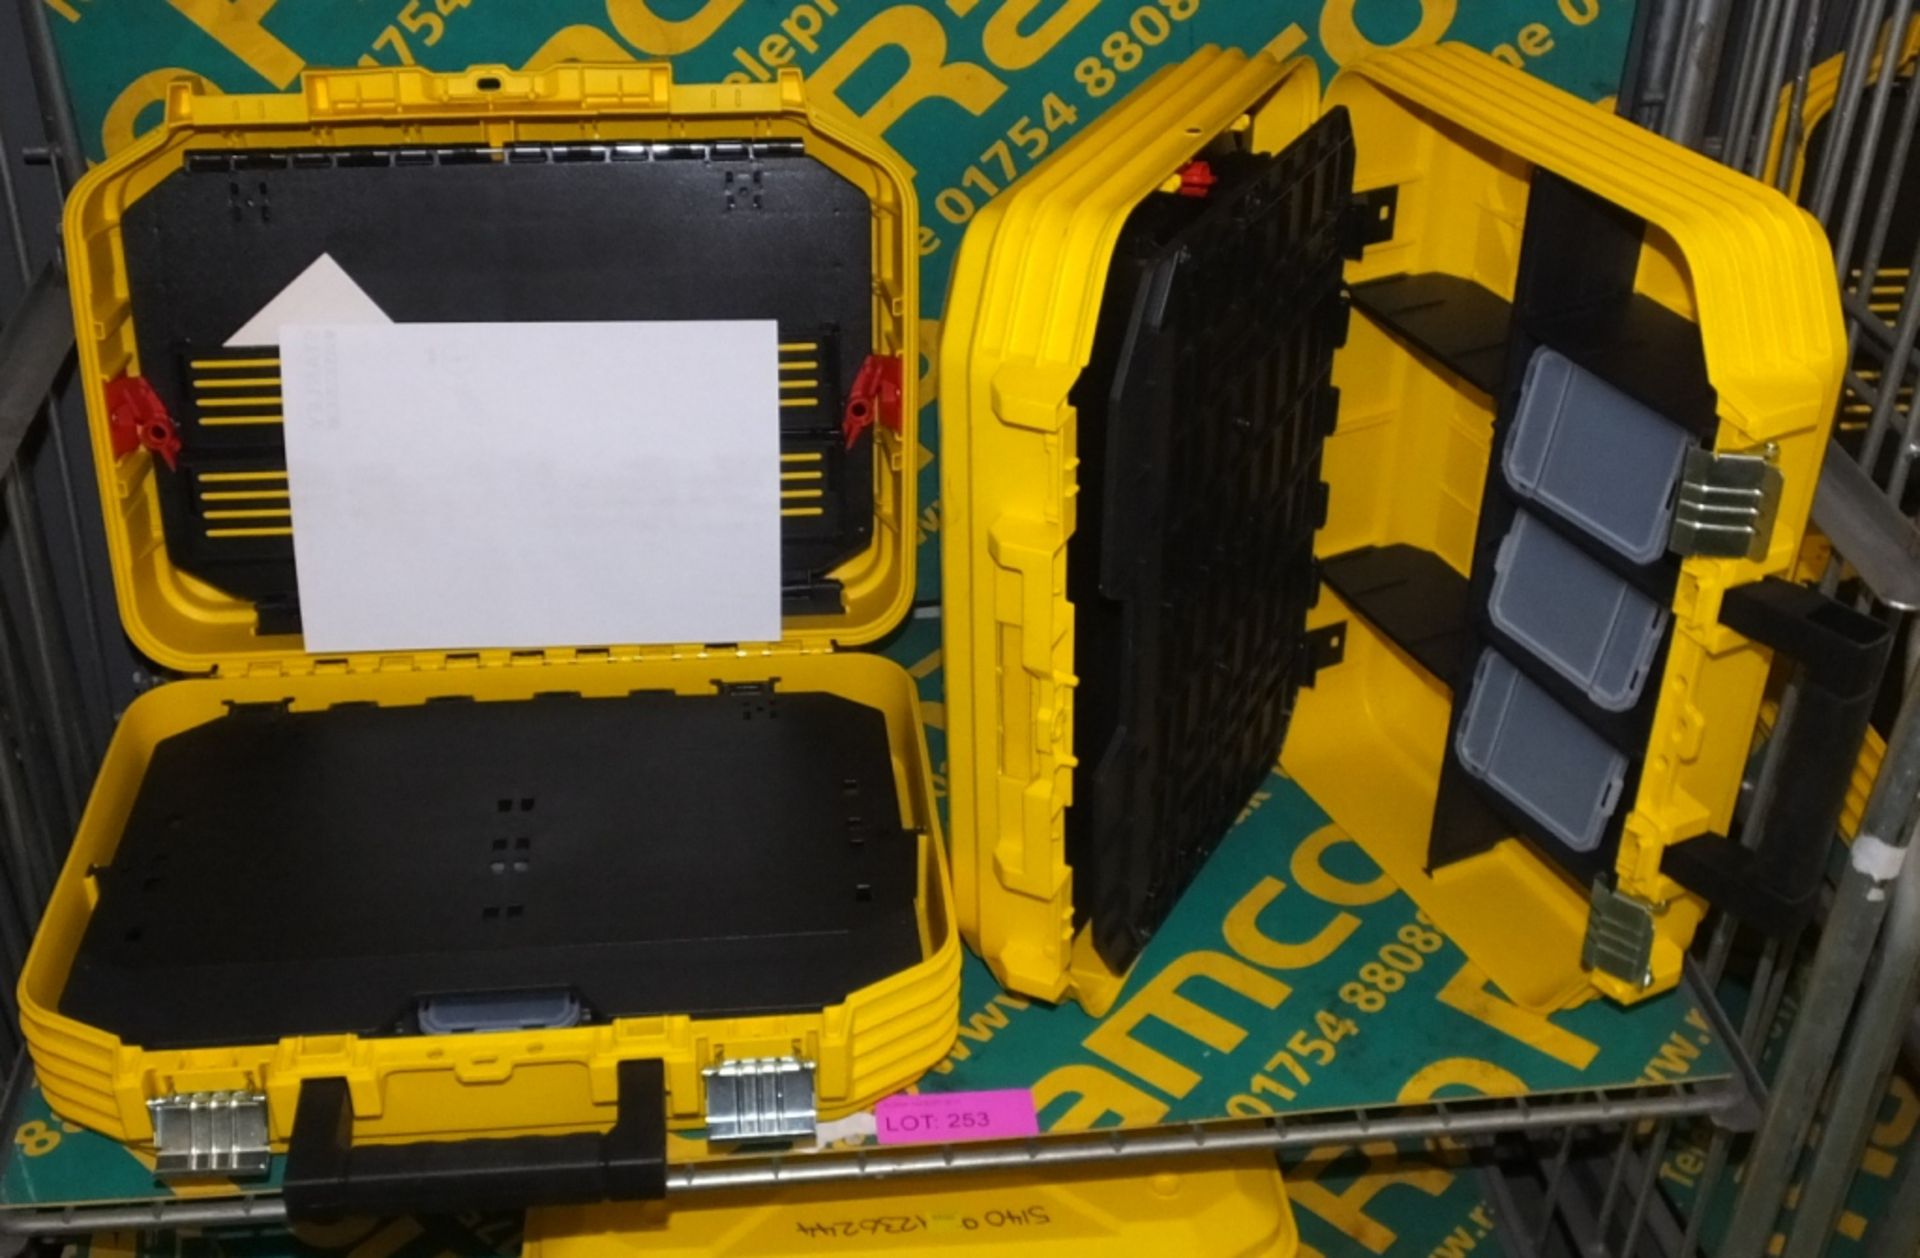 2x Stanley Fatmax Toolboxes